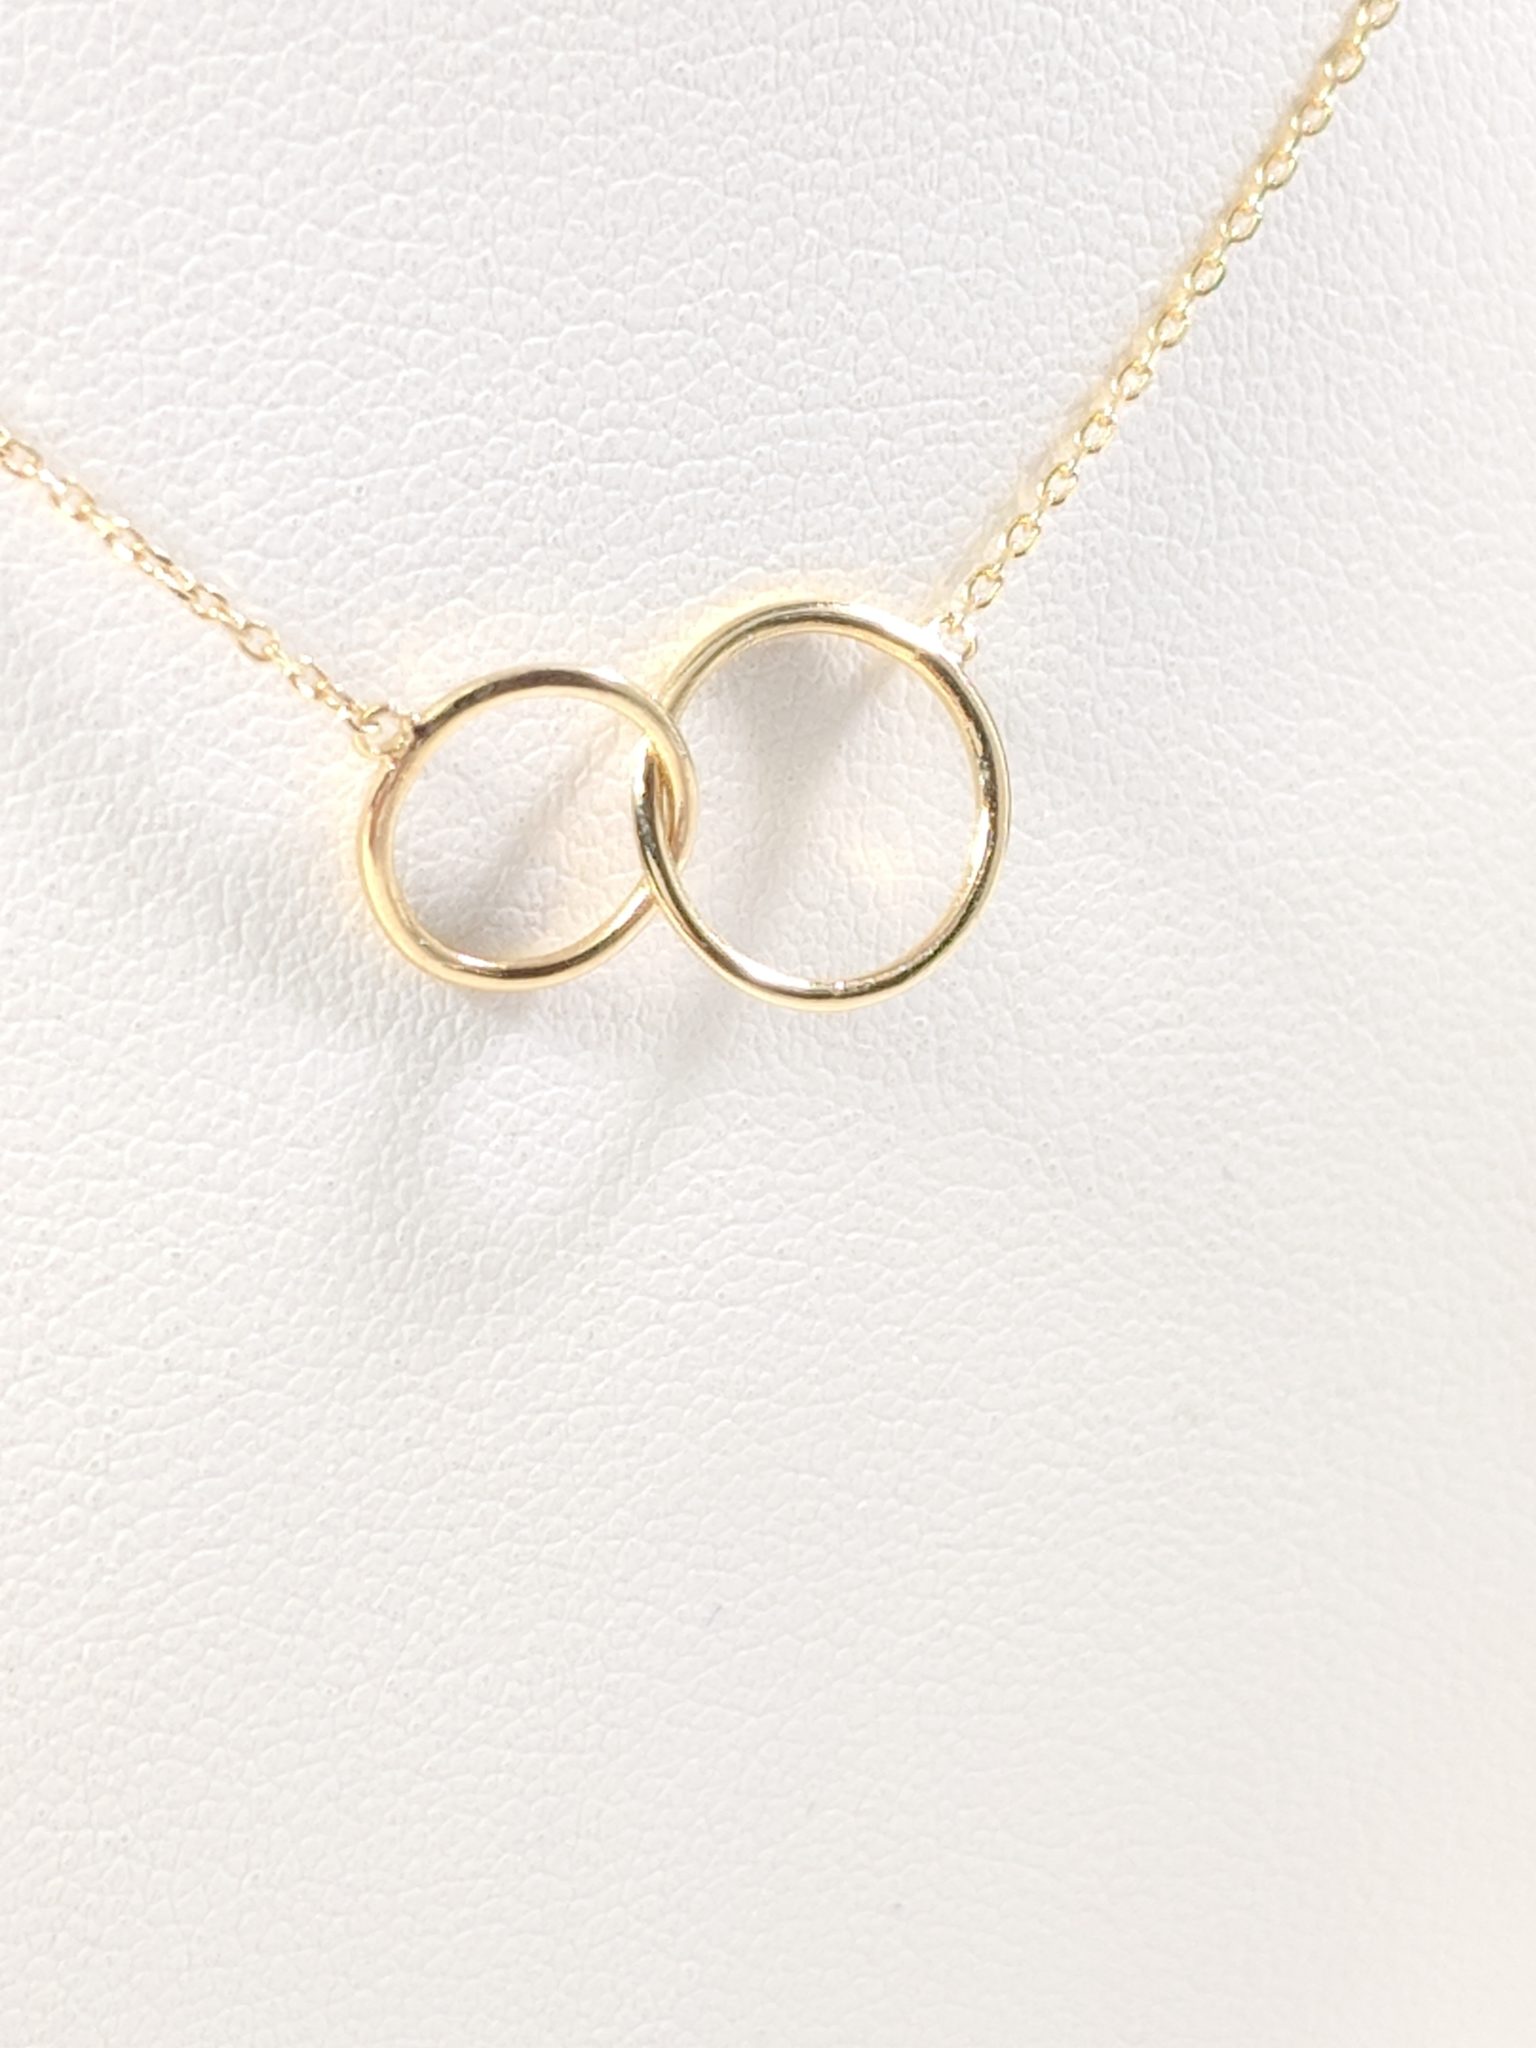 14K Yellow Gold Delicate Interlocking Love Ring Necklace 16″-18″ Close Up